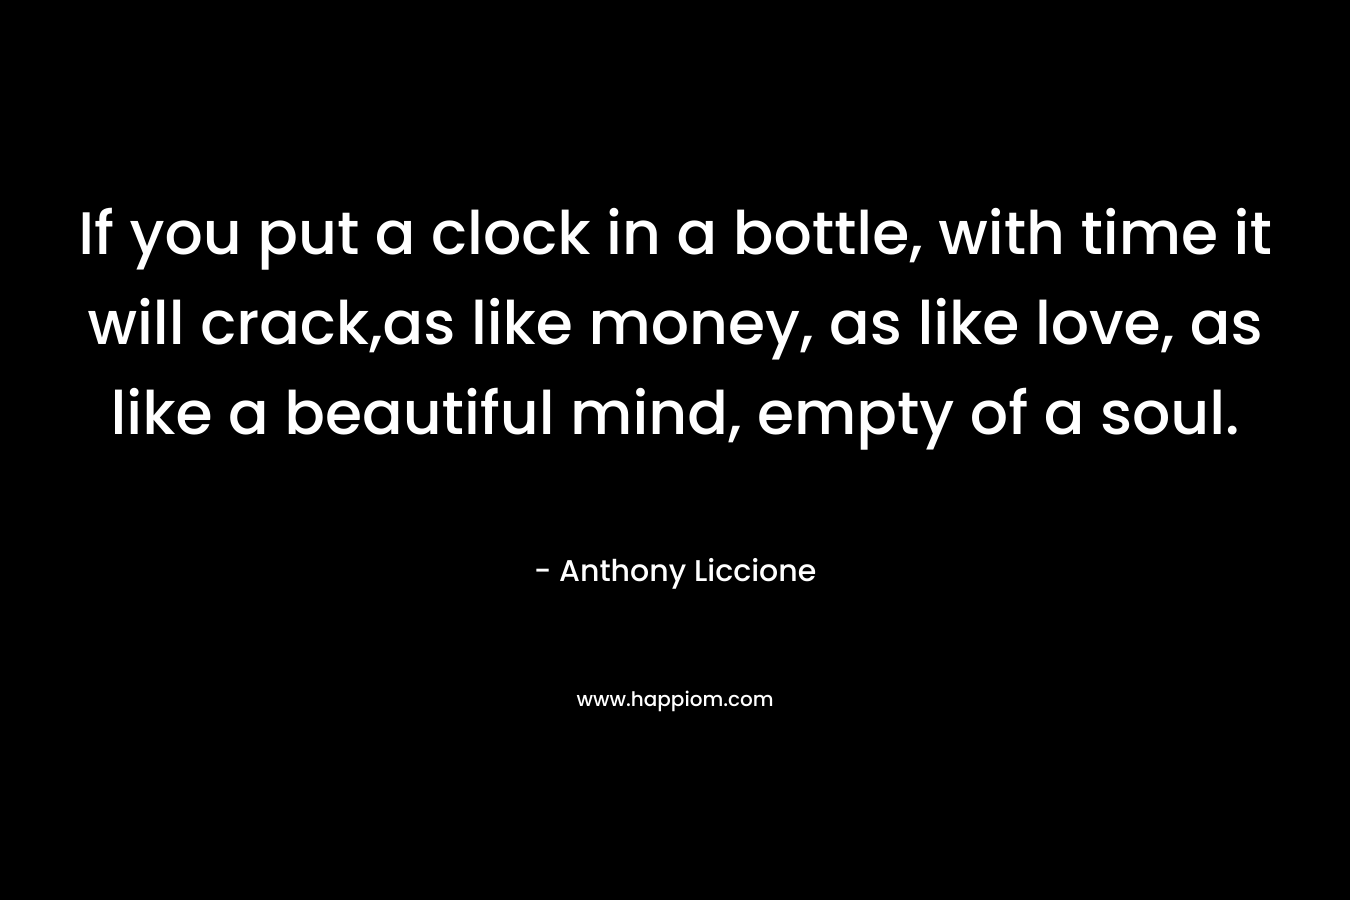 If you put a clock in a bottle, with time it will crack,as like money, as like love, as like a beautiful mind, empty of a soul.